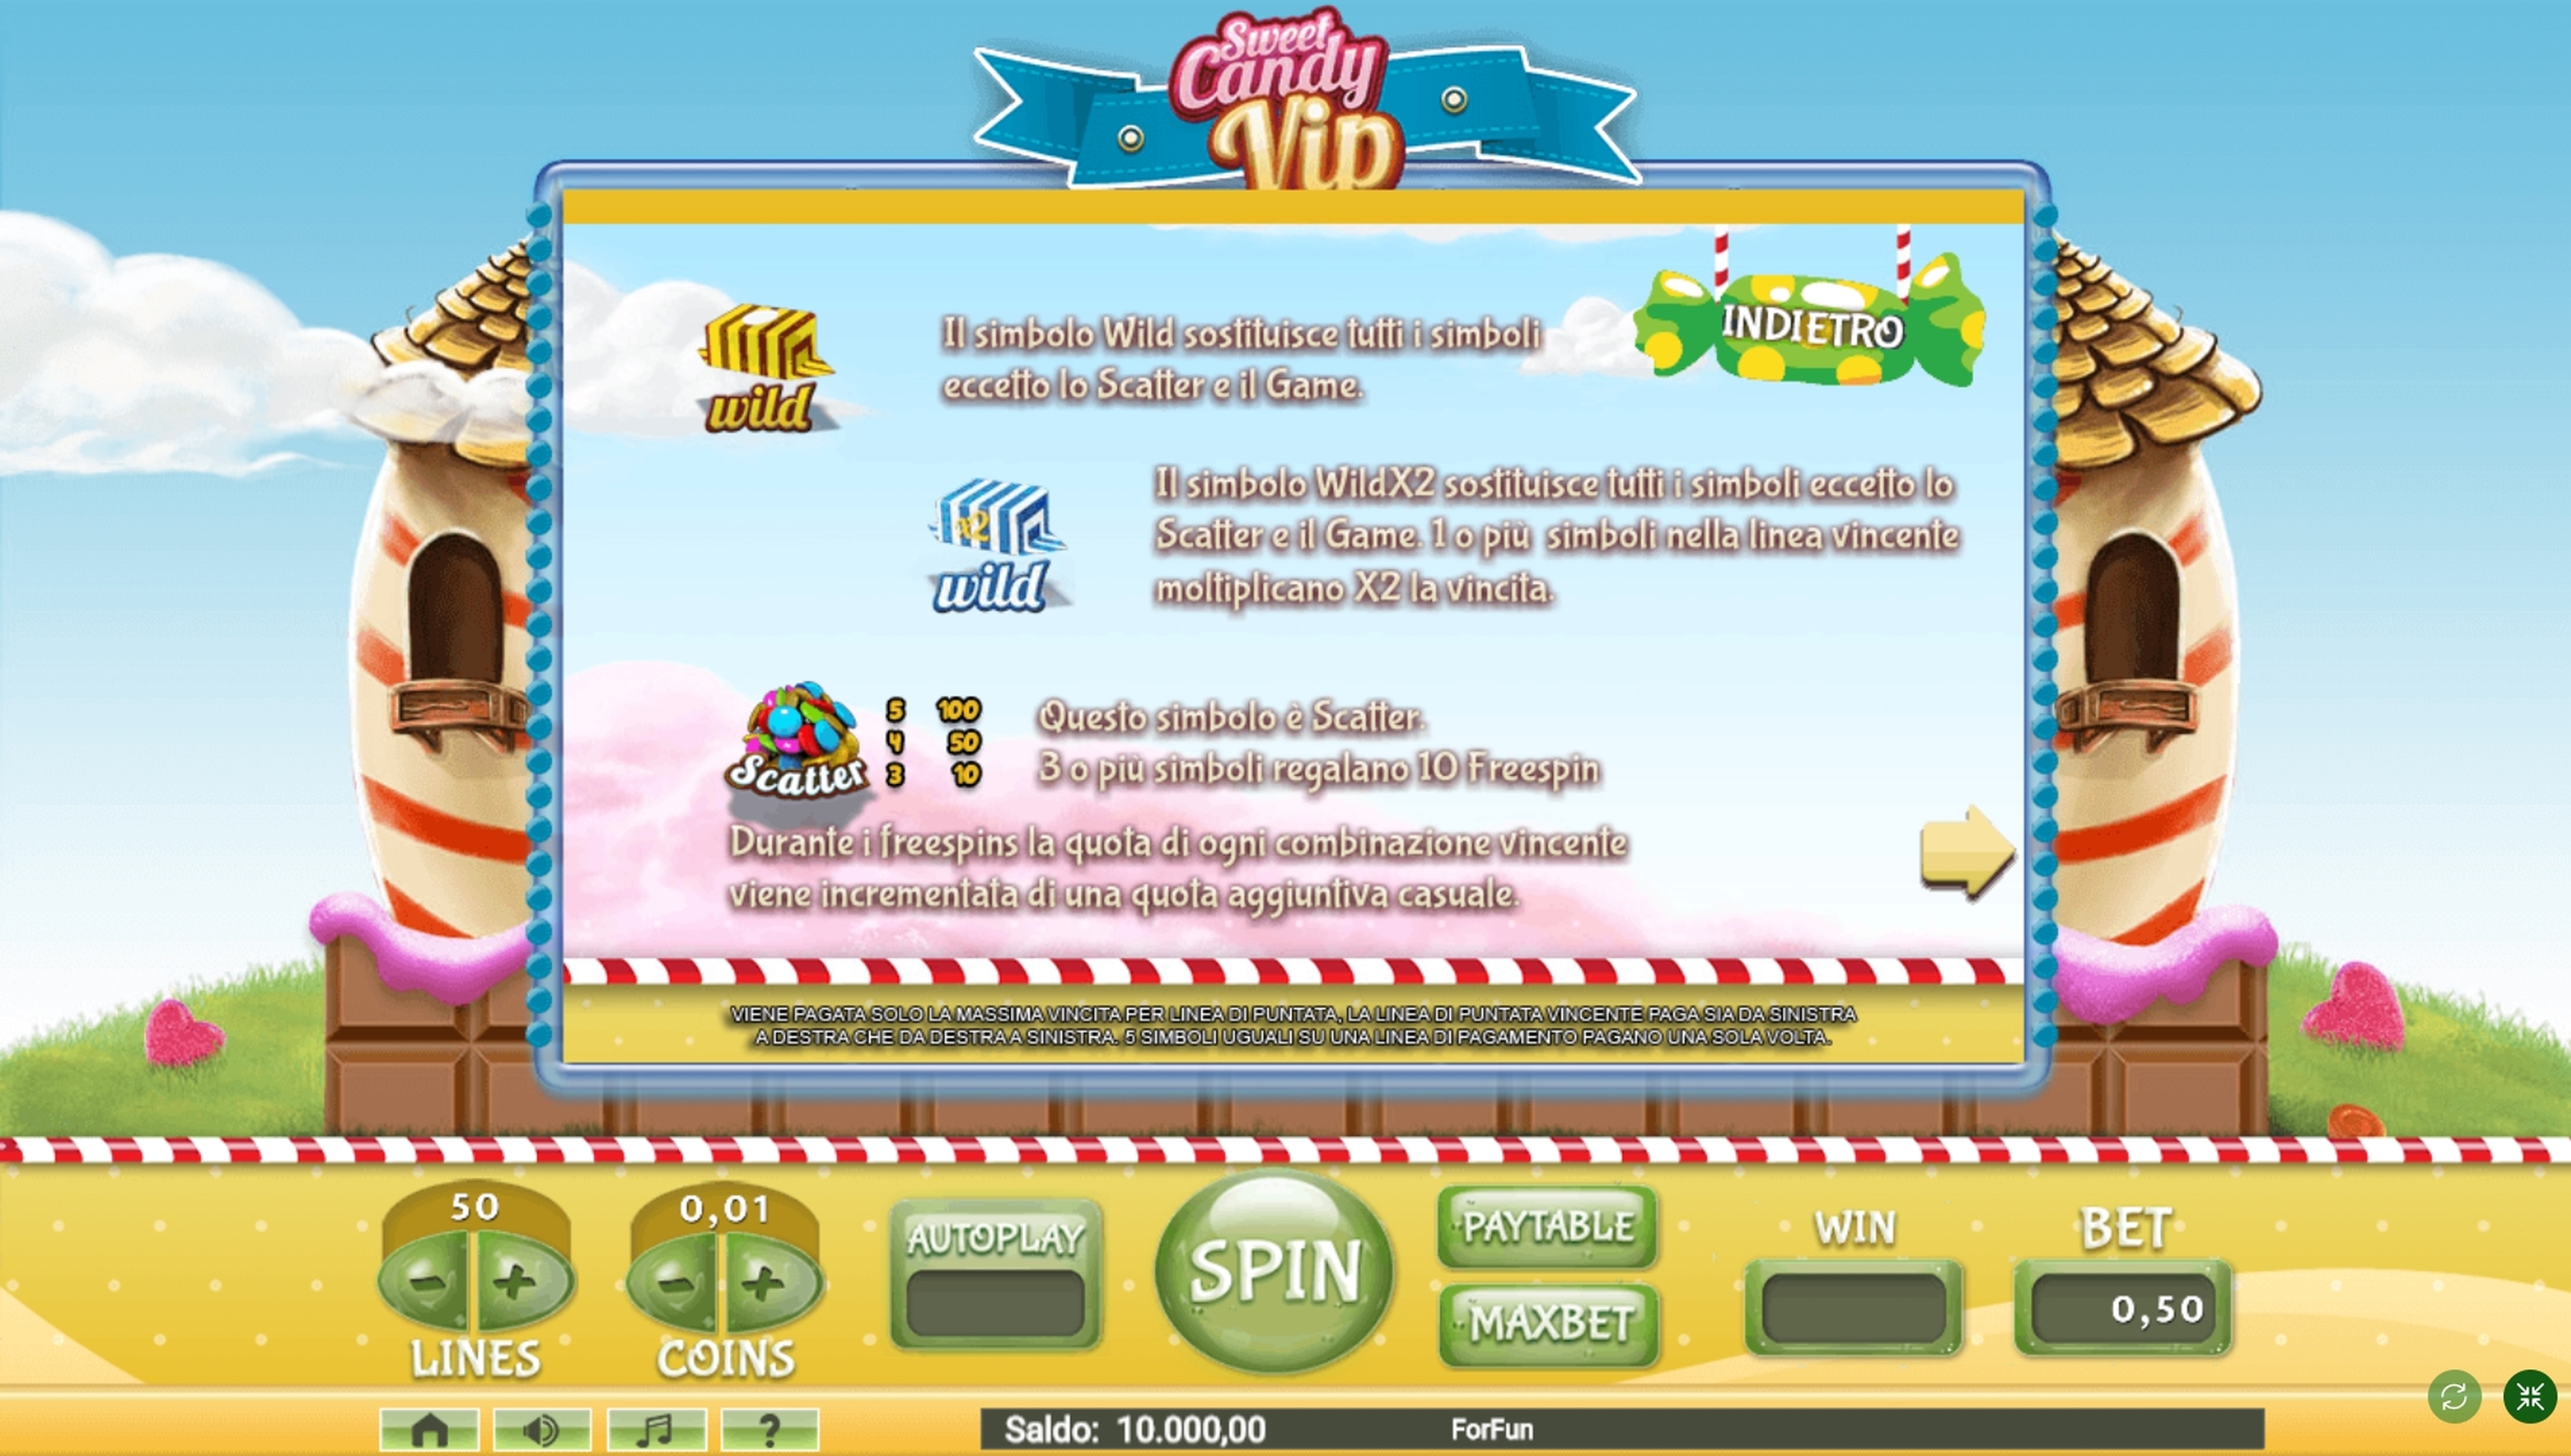 Info of Sweet Candy Vip Slot Game by Tuko Productions